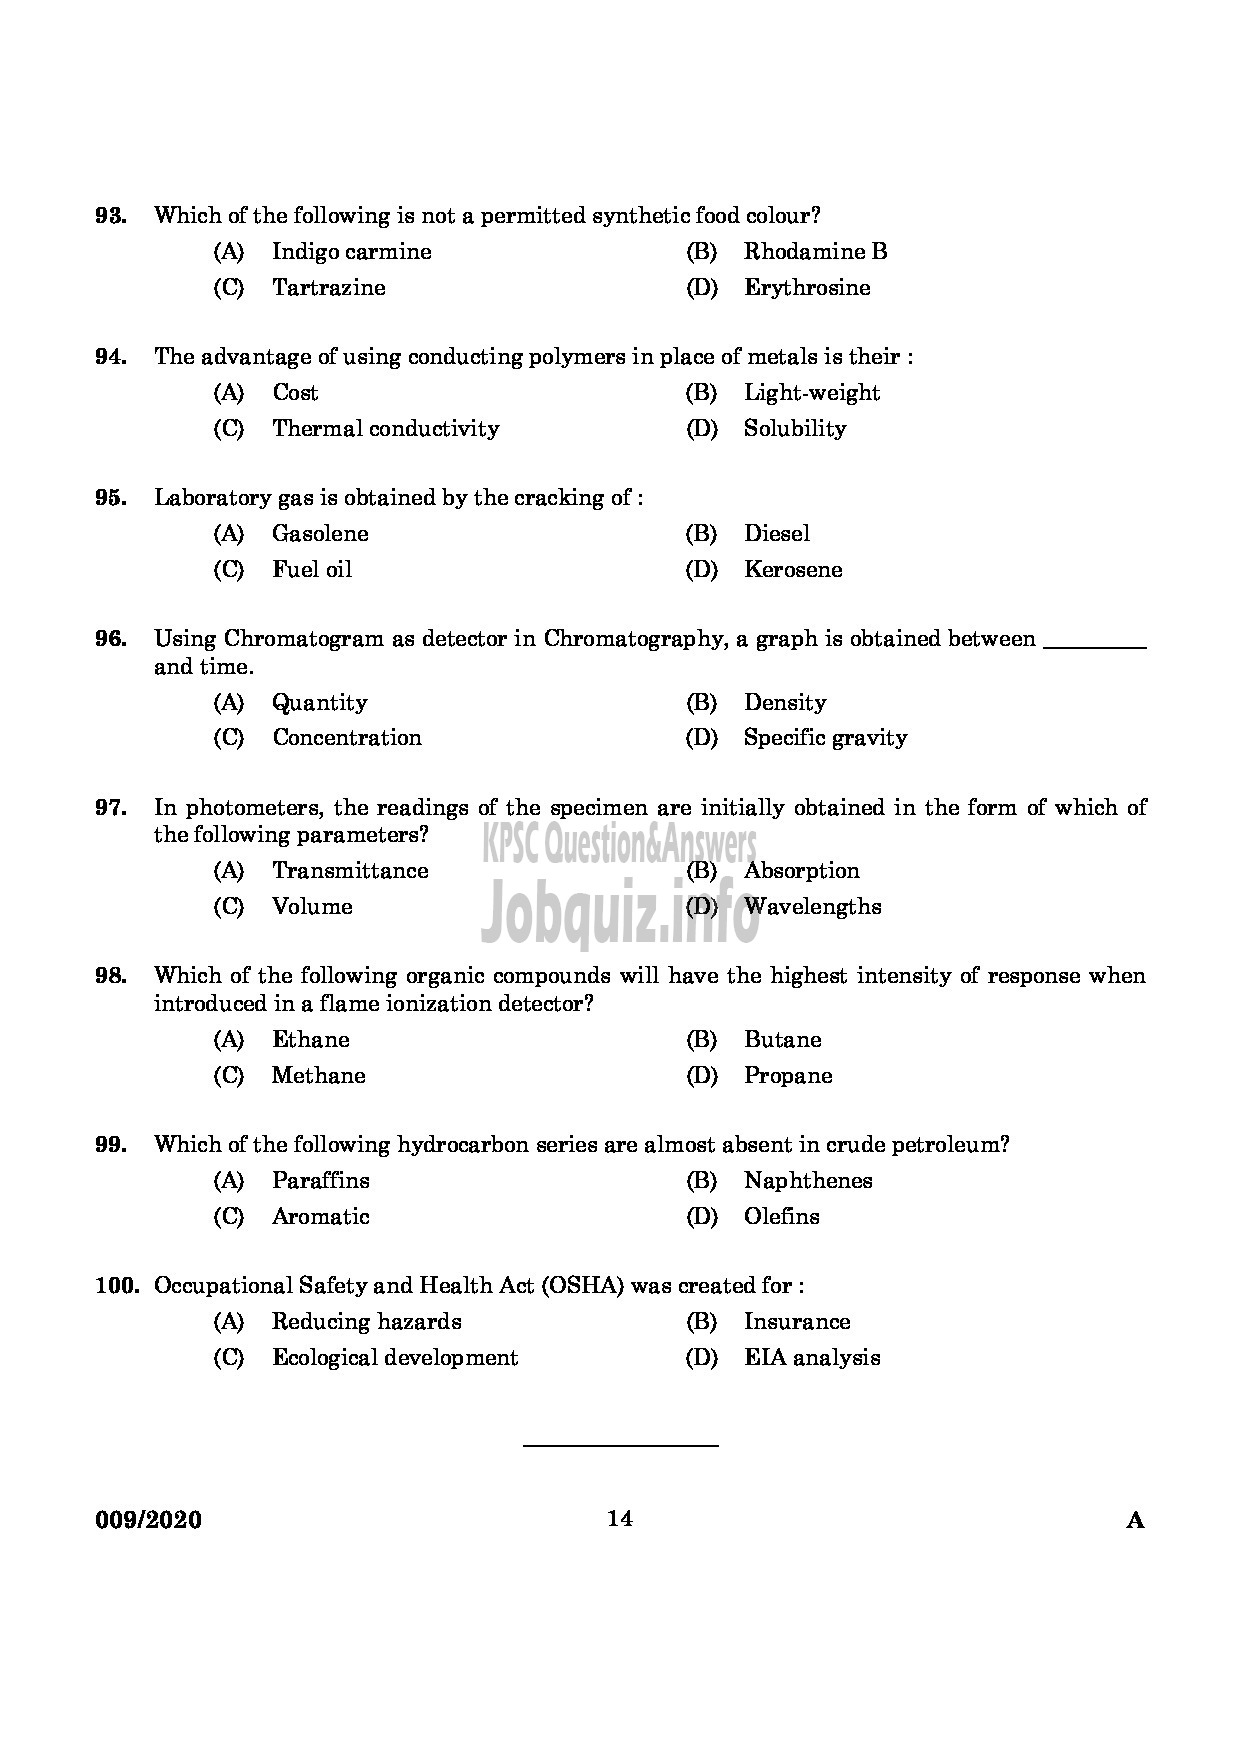 Kerala PSC Question Paper - CHEMIST IN FACTORIES AND BOILERS ENGLISH -12